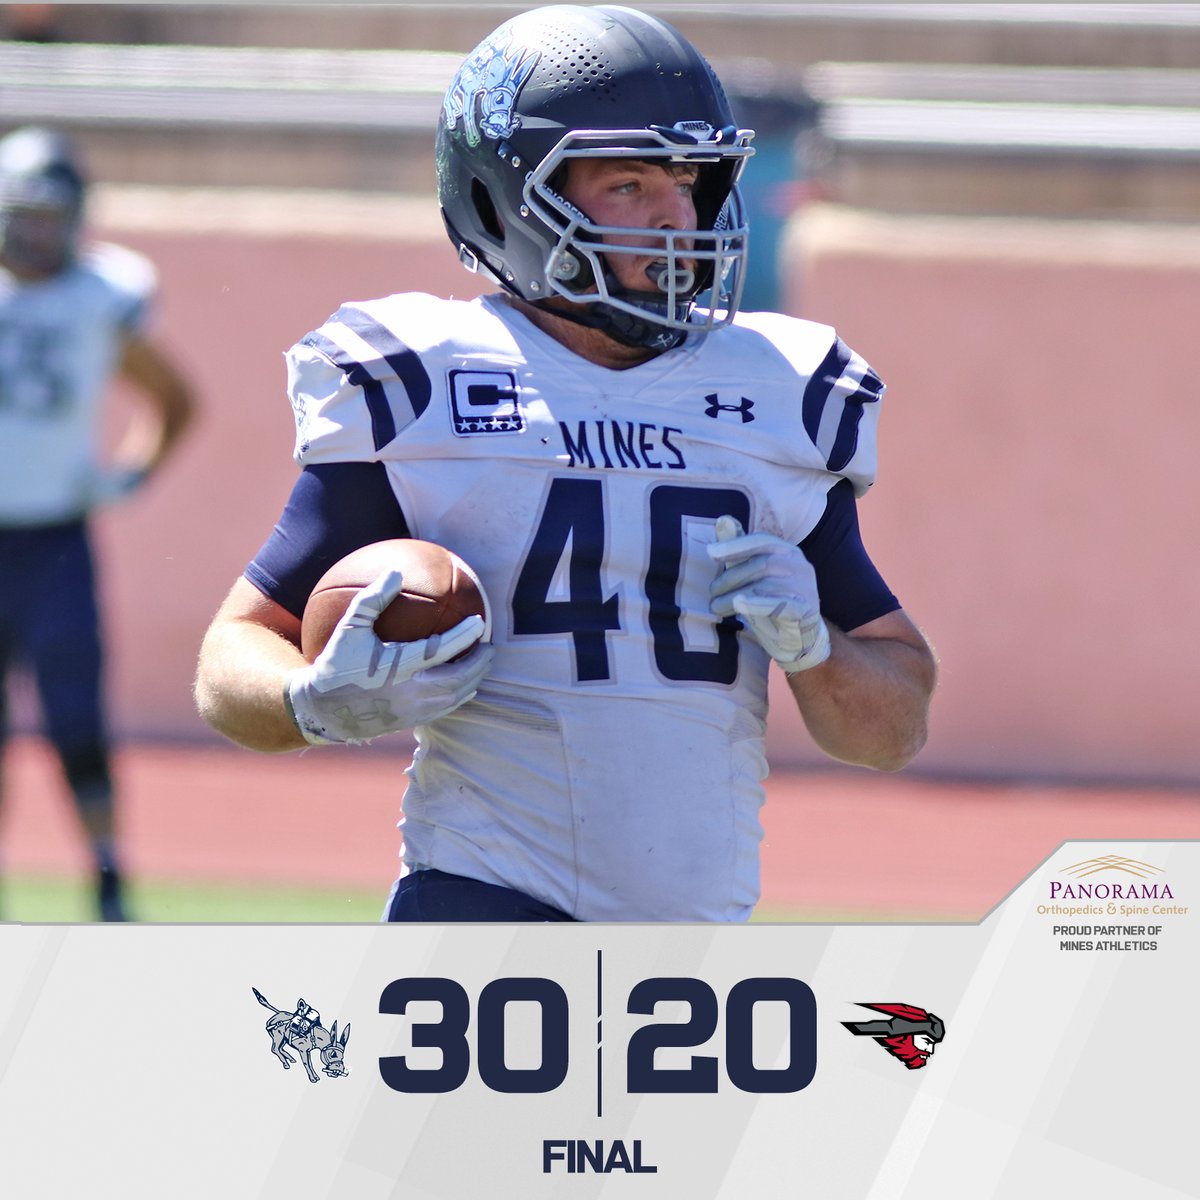 We'll come home with the W and at least a share of the RMAC title! #HelluvaEngineer⚒️